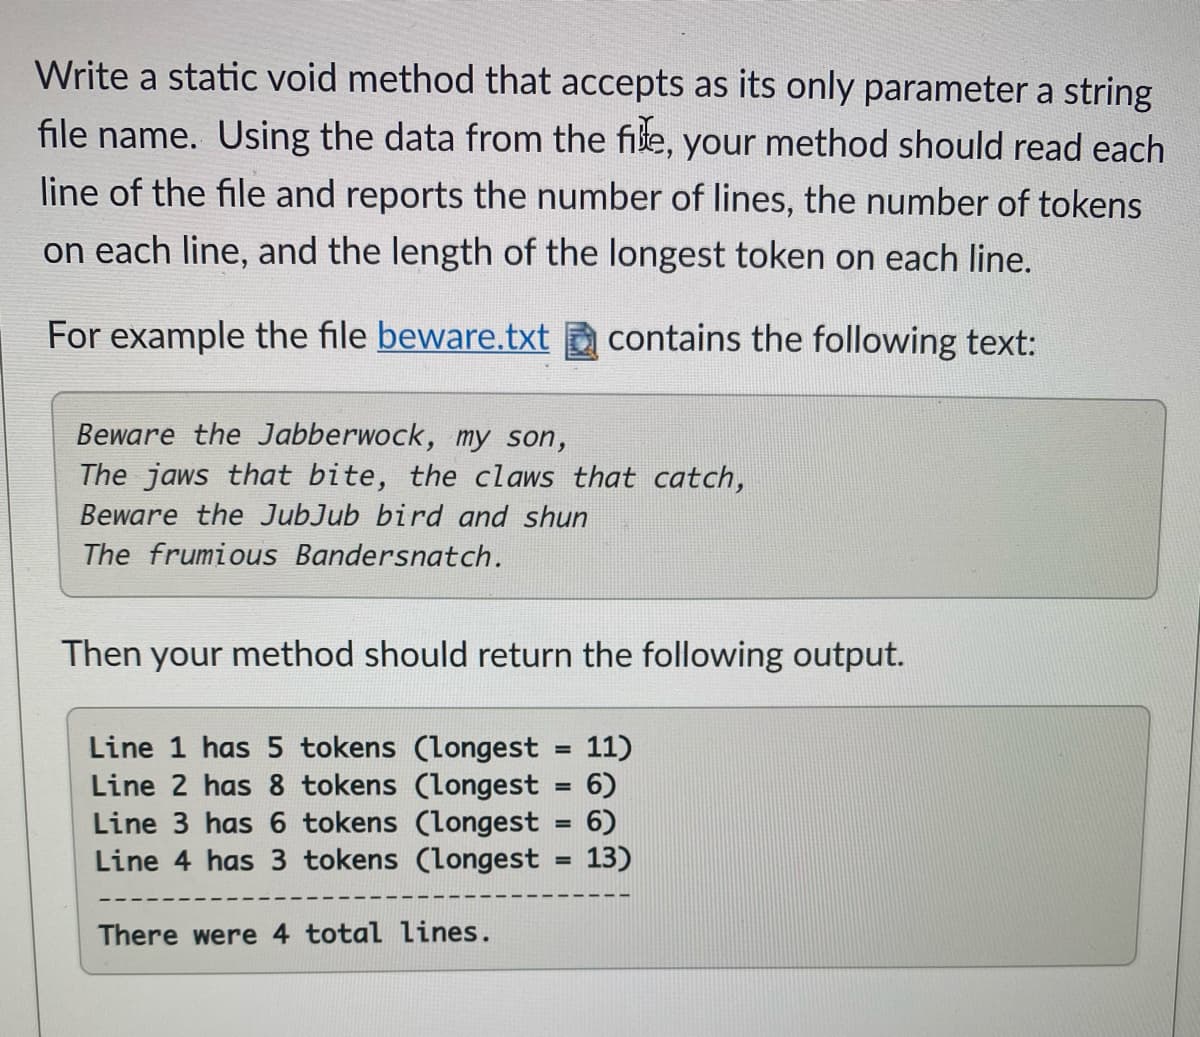 Write a static void method that accepts as its only parameter a string
file name. Using the data from the file, your method should read each
line of the file and reports the number of lines, the number of tokens
on each line, and the length of the longest token on each line.
For example the file beware.txt
contains the following text:
Beware the Jabberwock, my son,
The jaws that bite, the claws that catch,
Beware the JubJub bird and shun
The frumious Bandersnatch.
Then your method should return the following output.
Line 1 has 5 tokens (longest = 11)
Line 2 has 8 tokens (longest = 6)
Line 3 has 6 tokens (longest = 6)
Line 4 has 3 tokens (longest = 13)
%3D
There were 4 total lines.
